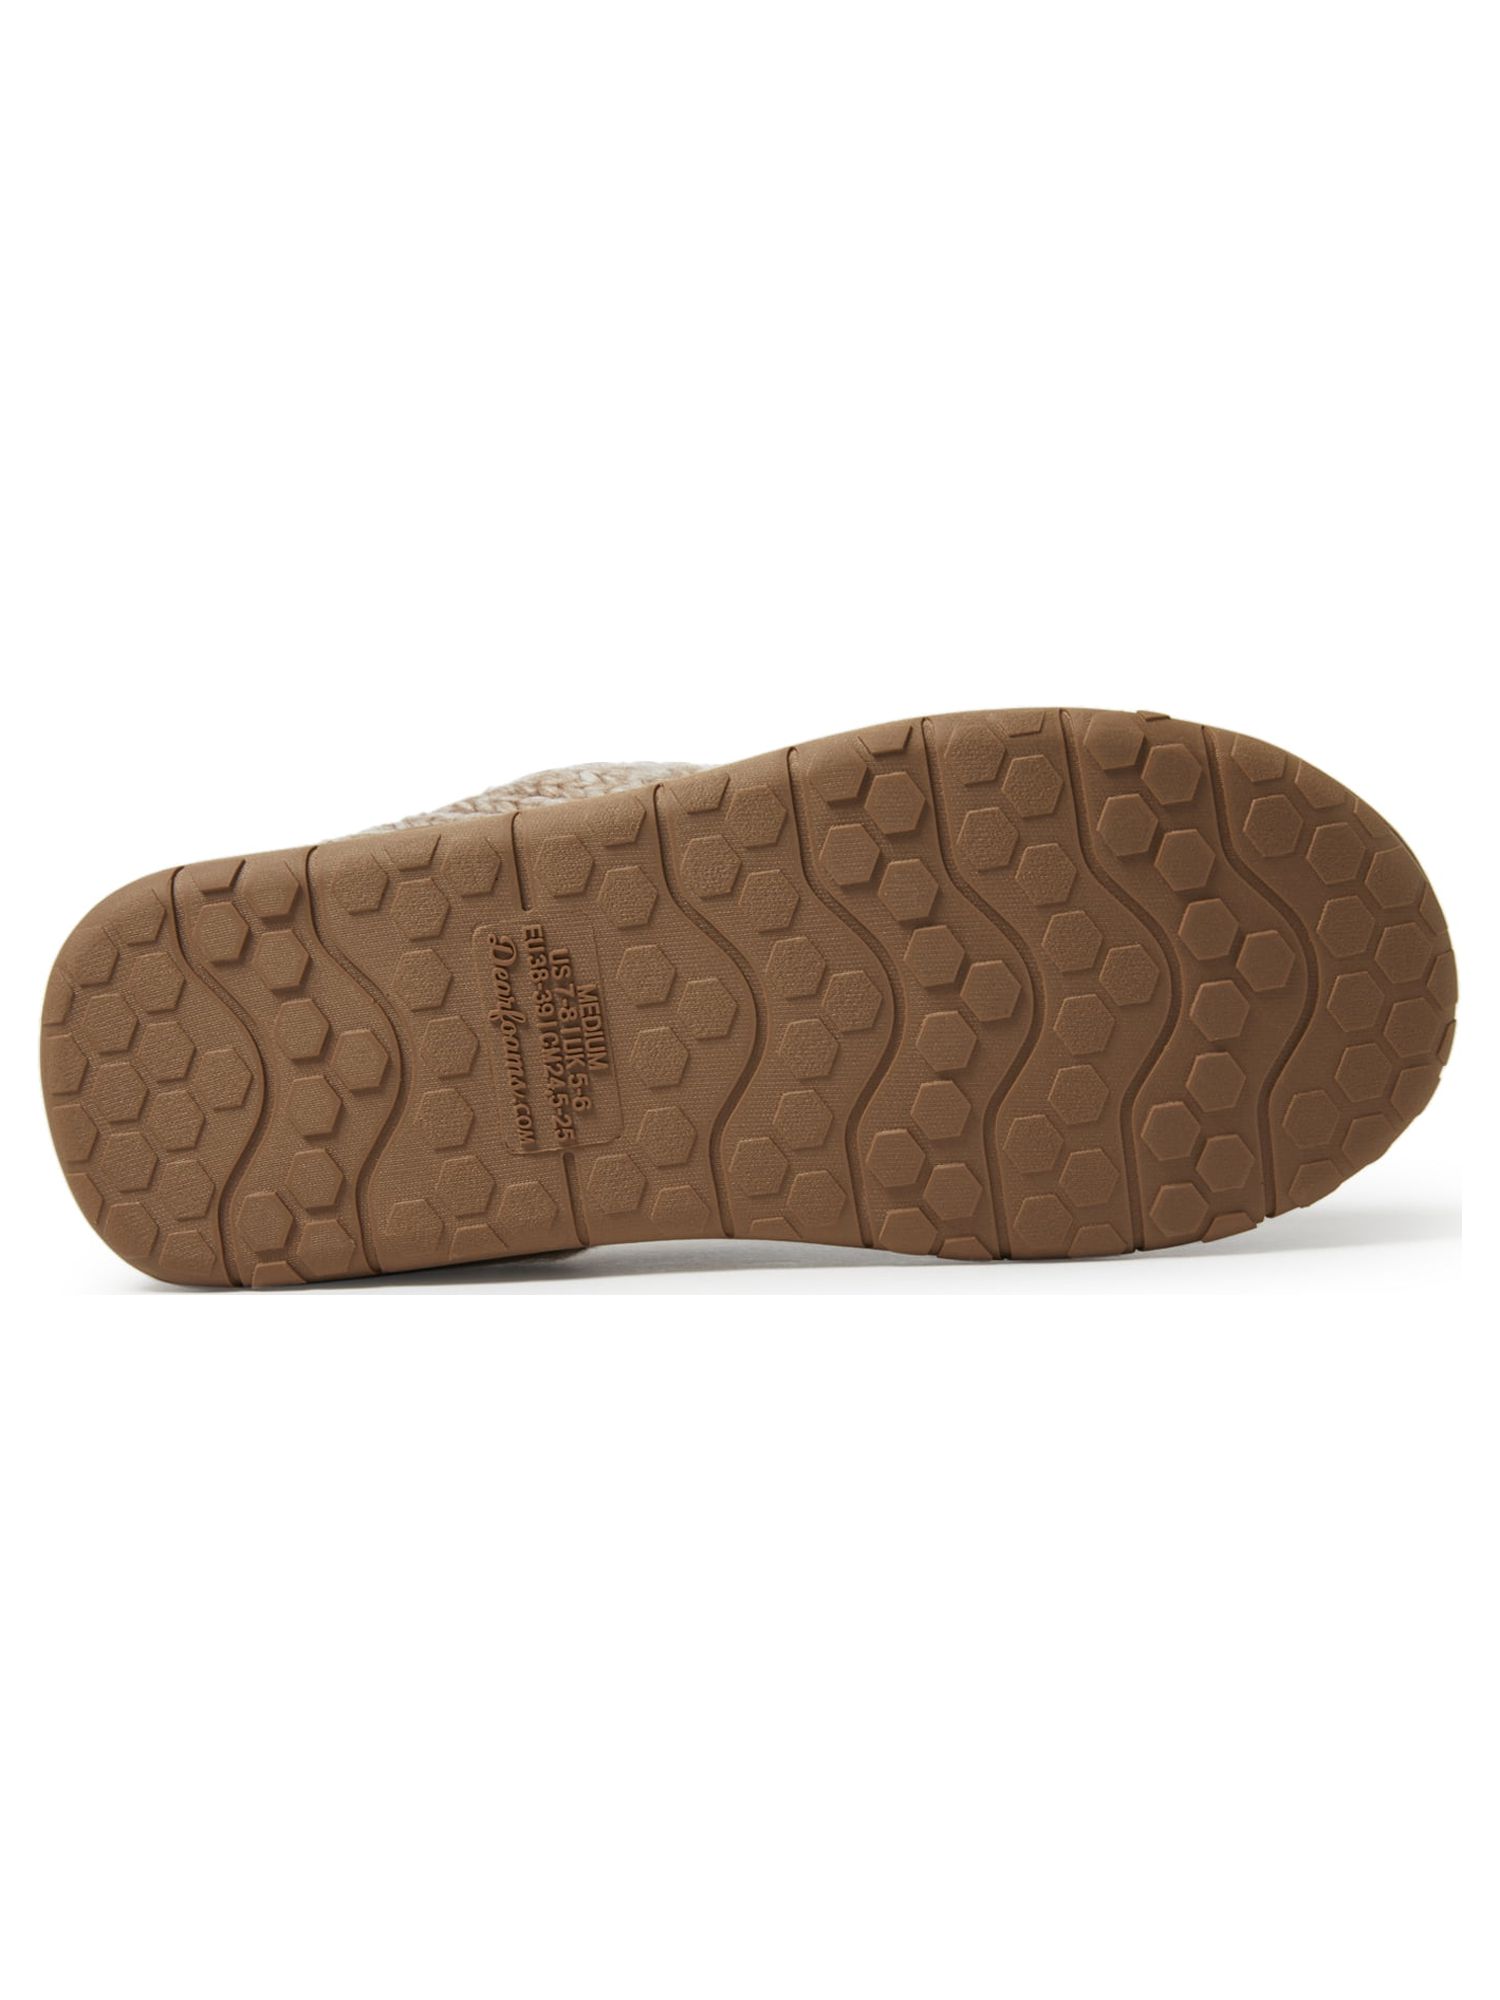 Dearfoams Cozy Comfort Women's Moc Toe Clog Slippers with Chunky Knit Collar - image 2 of 7